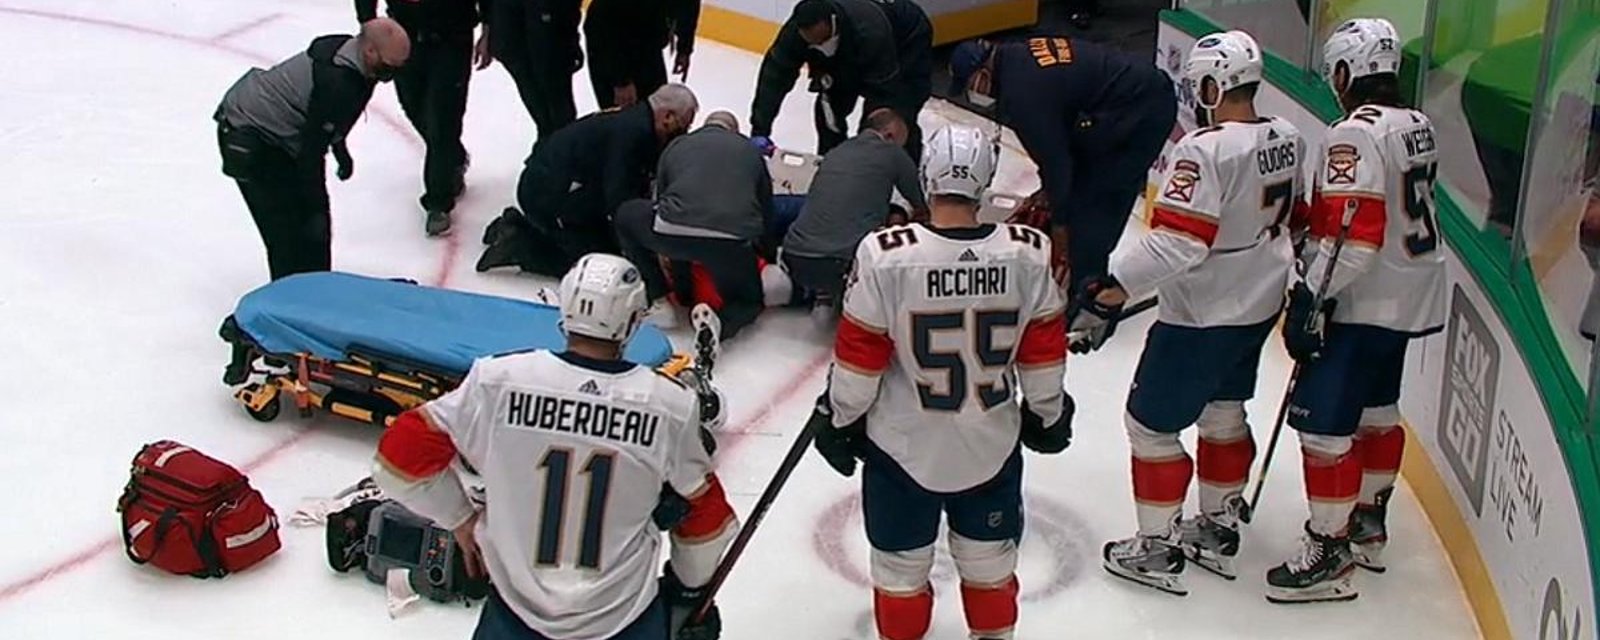 Aaron Ekblad carried out on a stretcher after suffering a horrific looking injury.